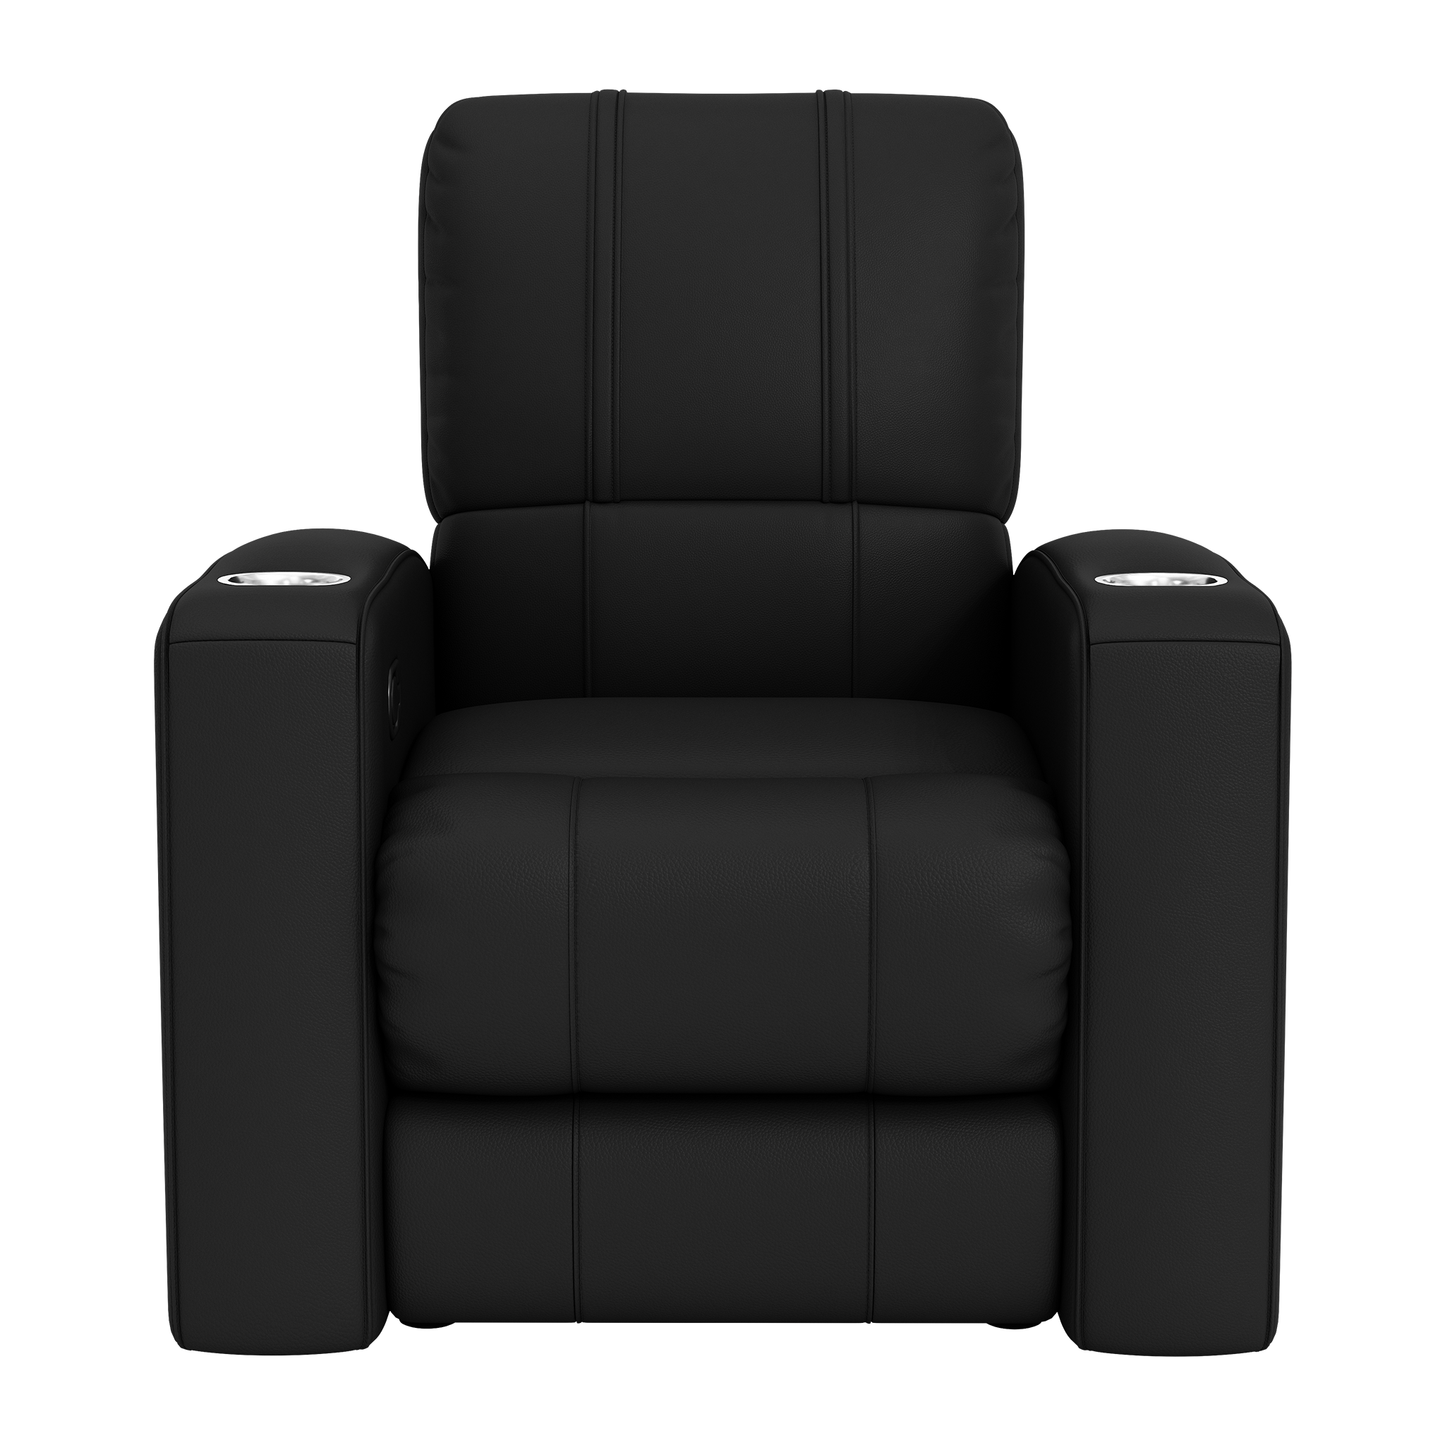 Relax Home Theater Recliner with FC Cincinnati Logo